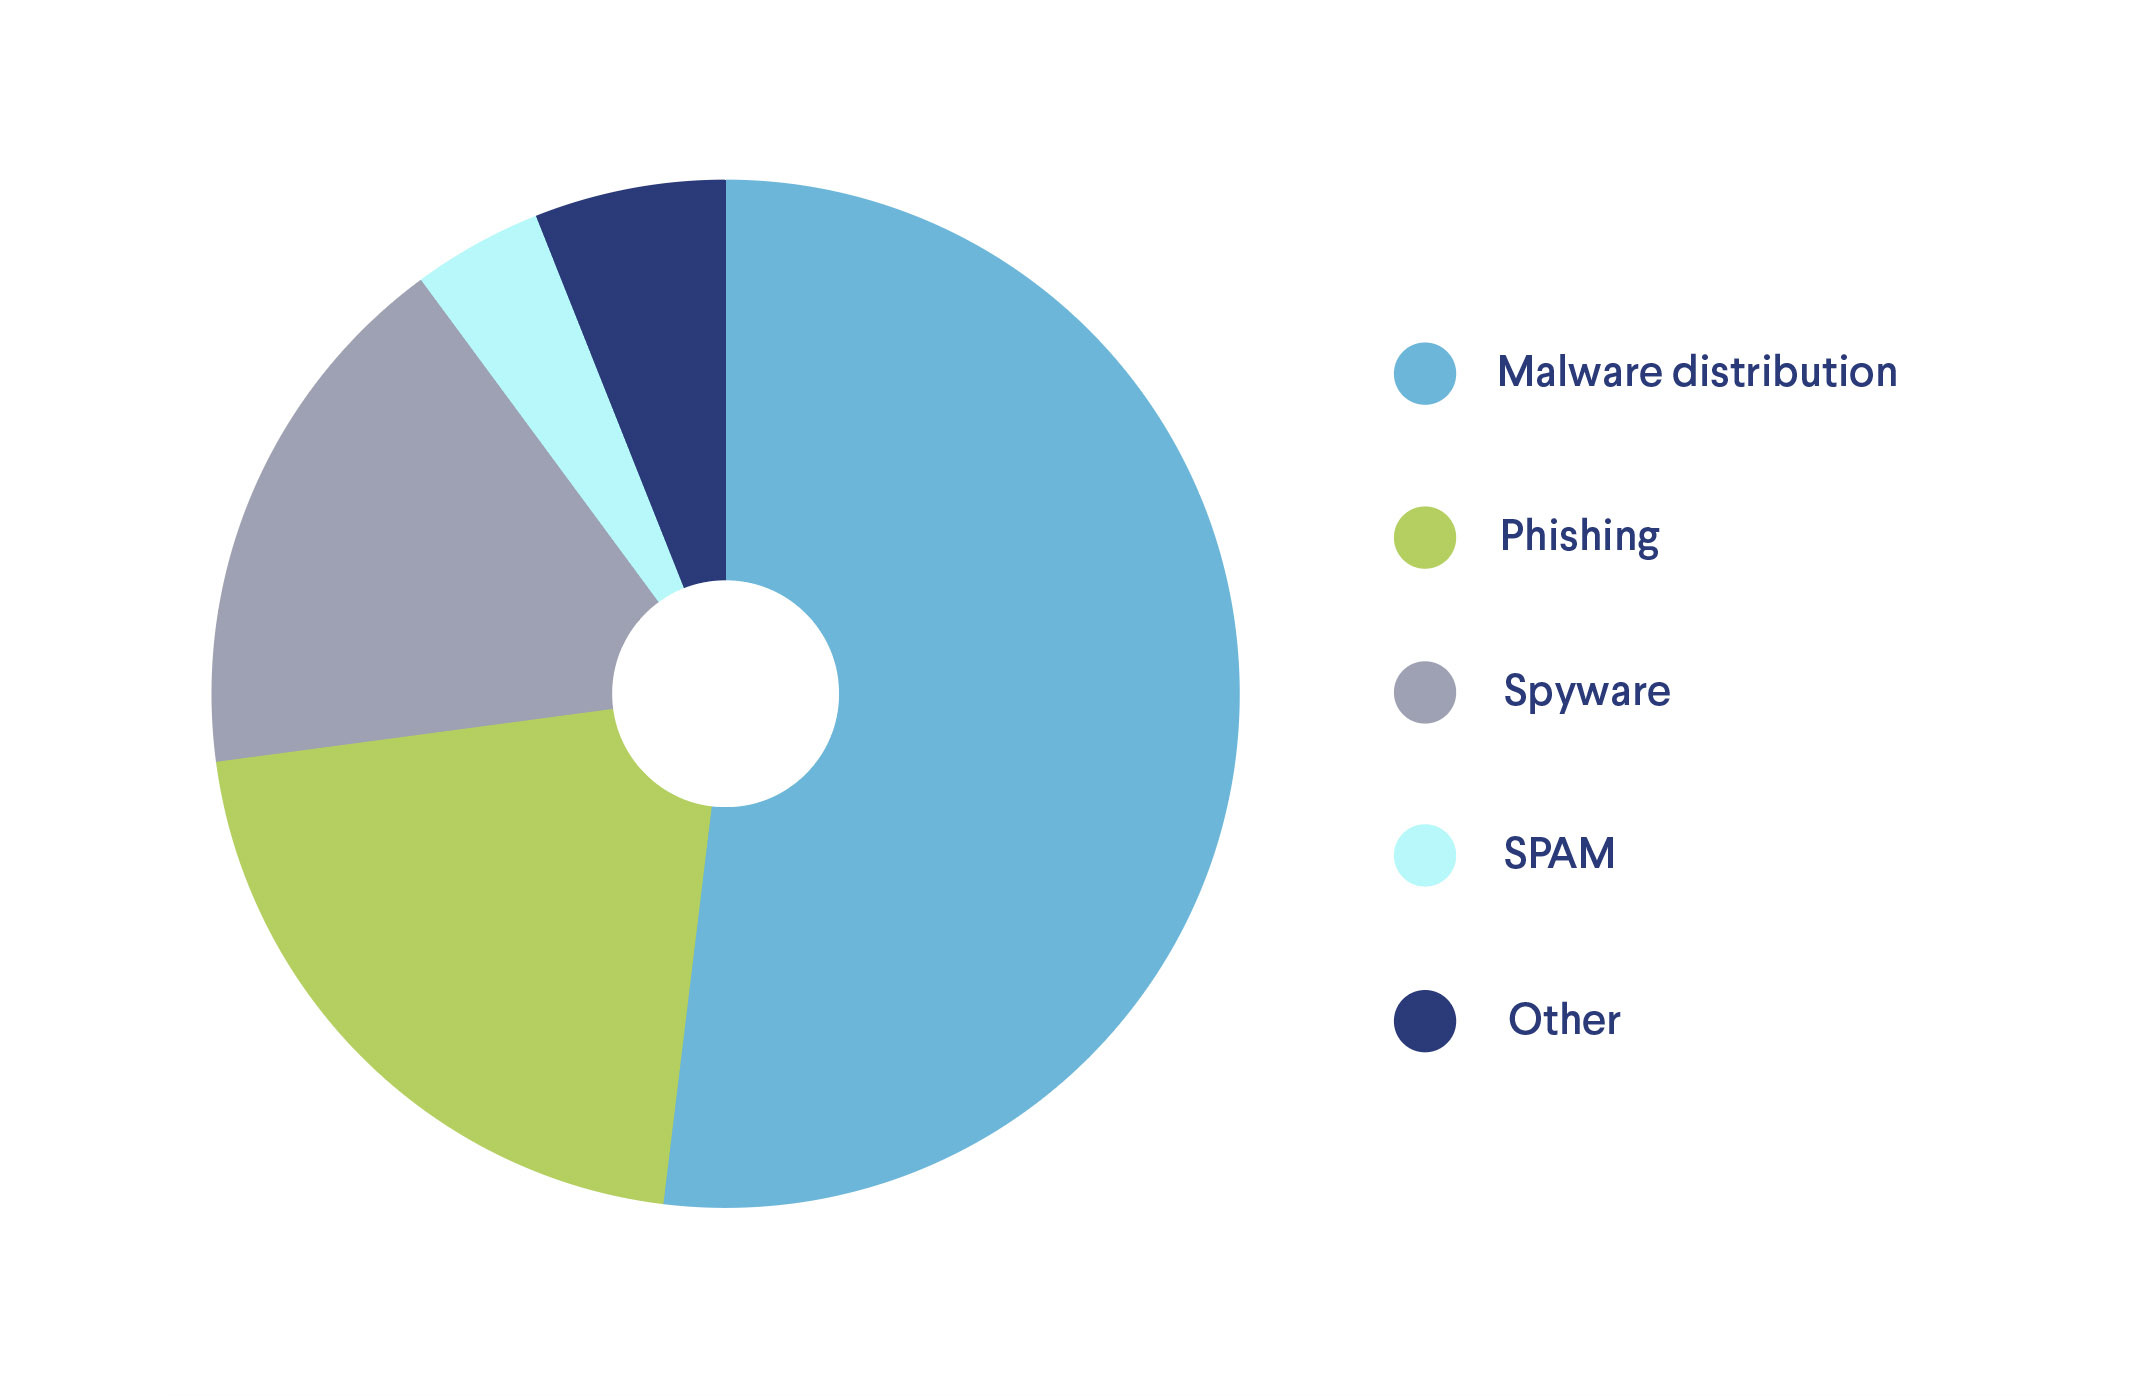 Top mobile browsing threats come from malware, phishing, spyware, and spam websites